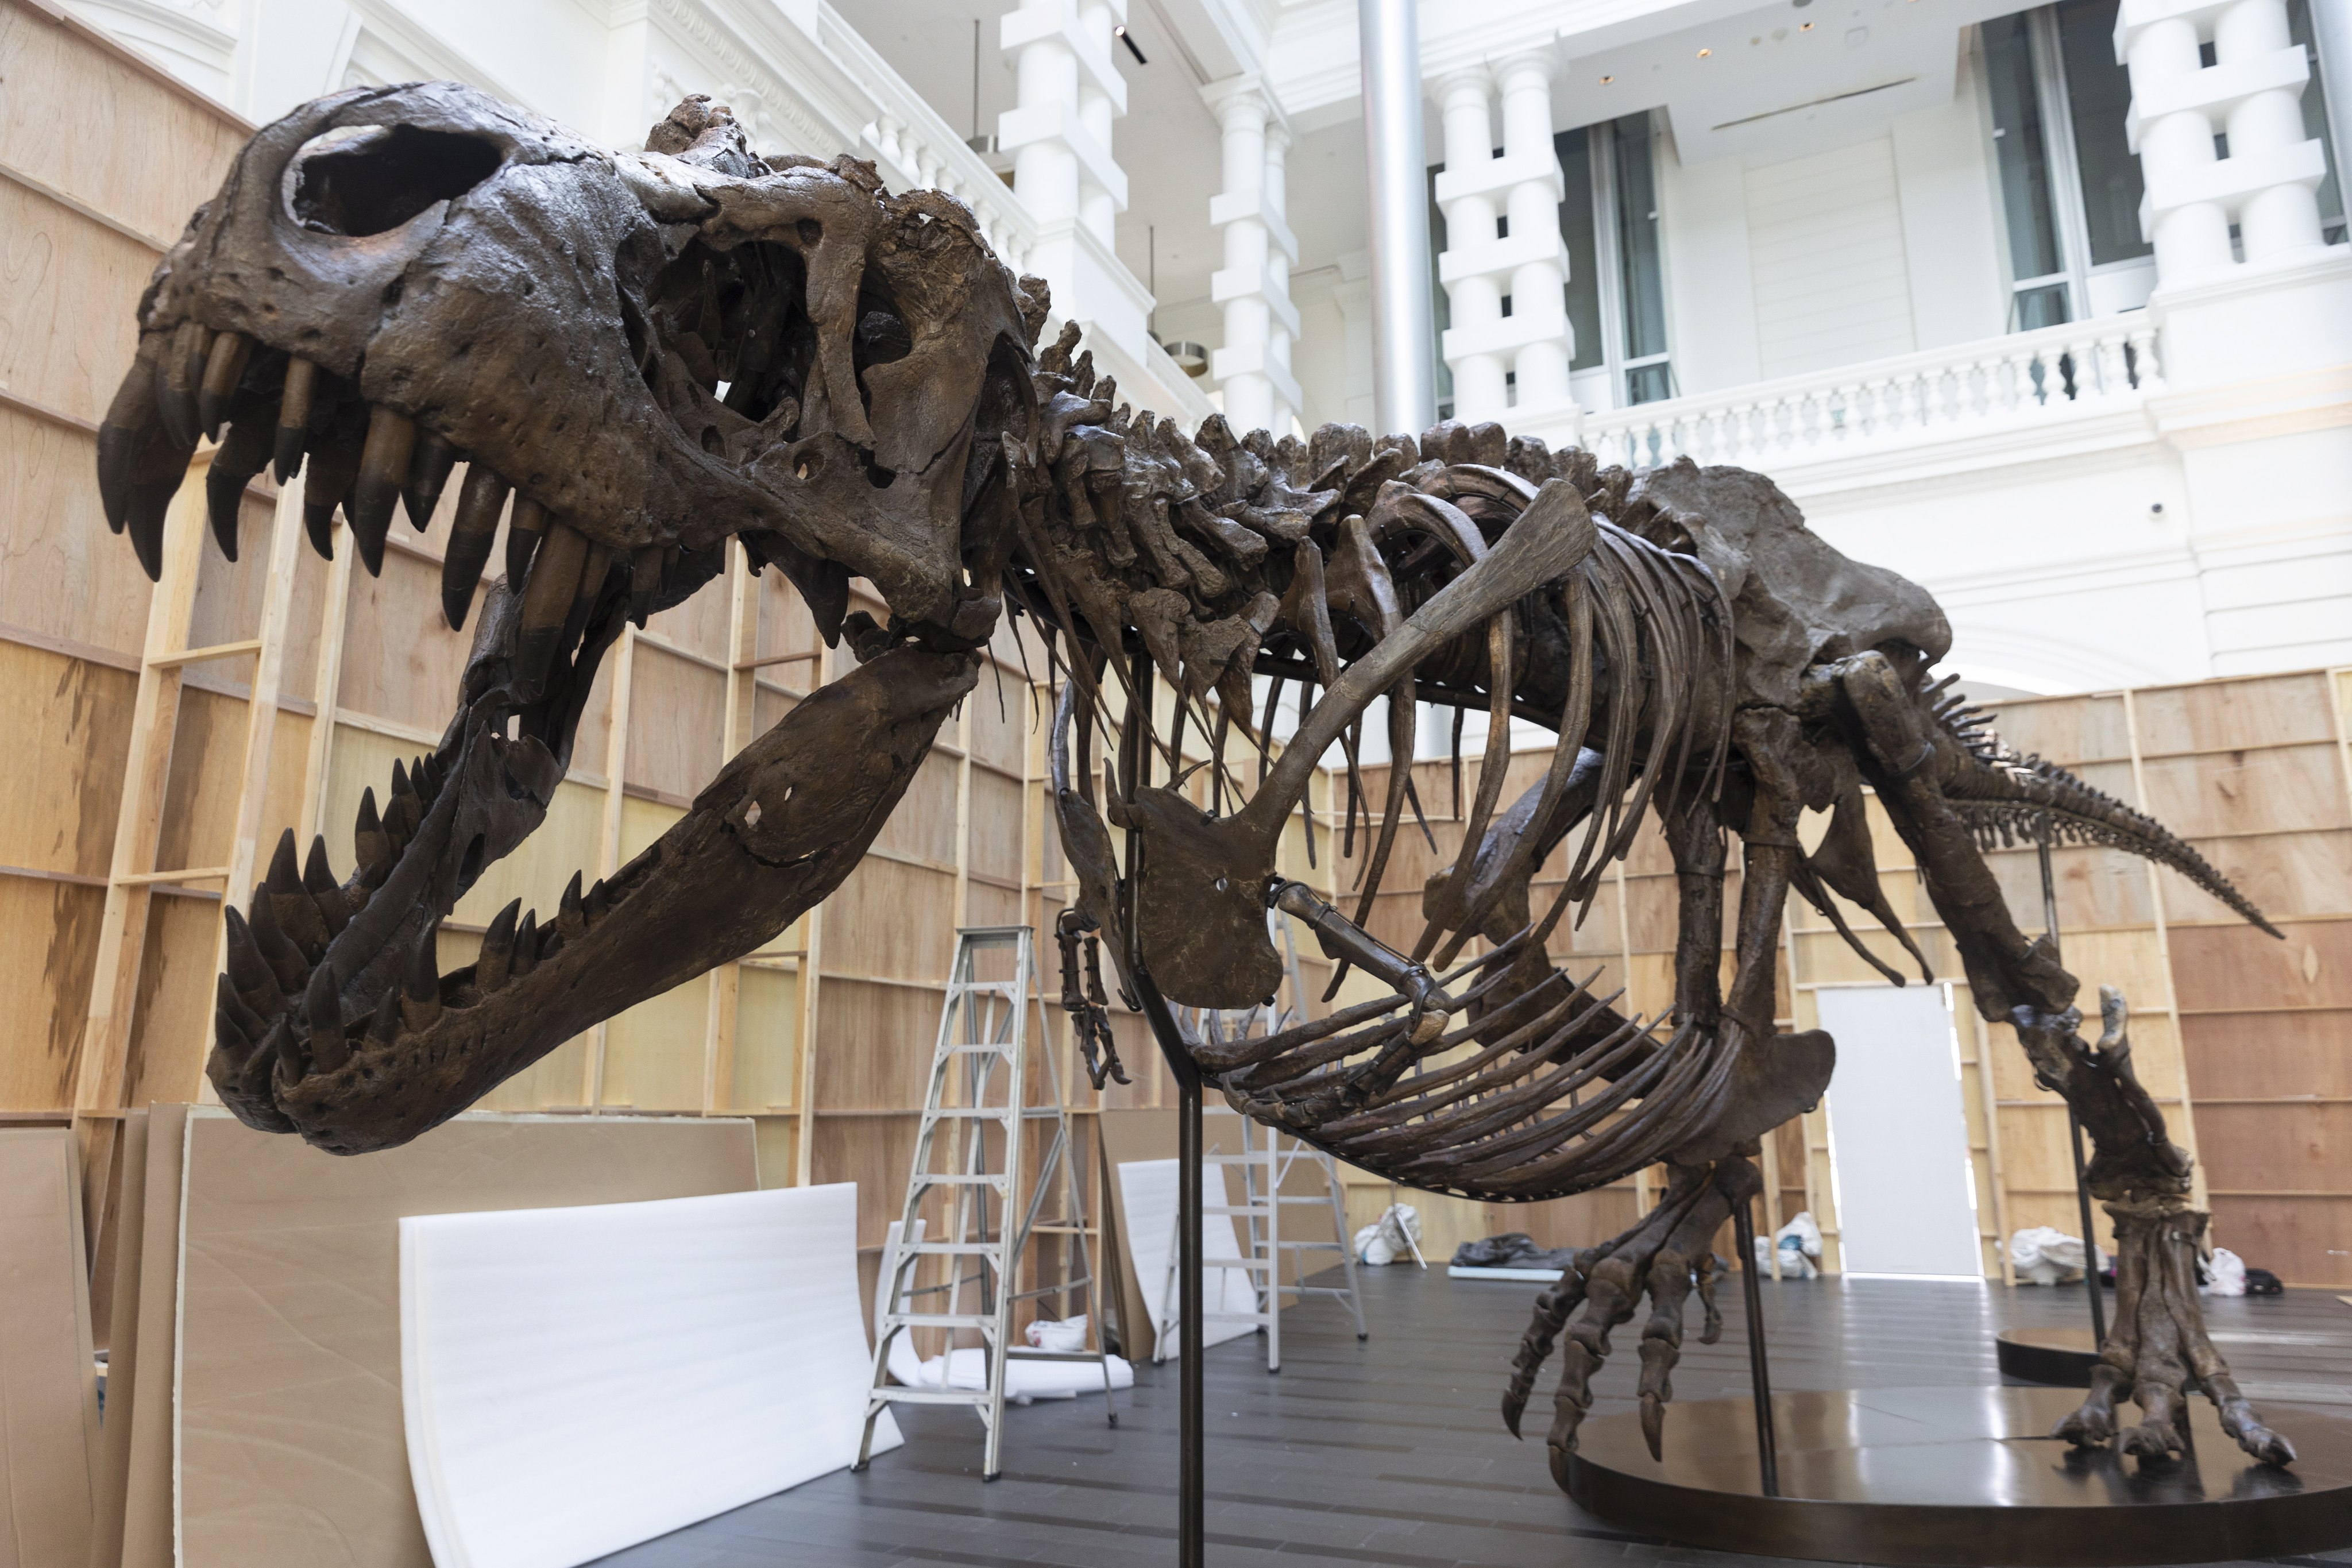 T-rex skeleton in Singapore is a first for Asia experts have got a bone to pick about 'harmful' auctions | South China Morning Post